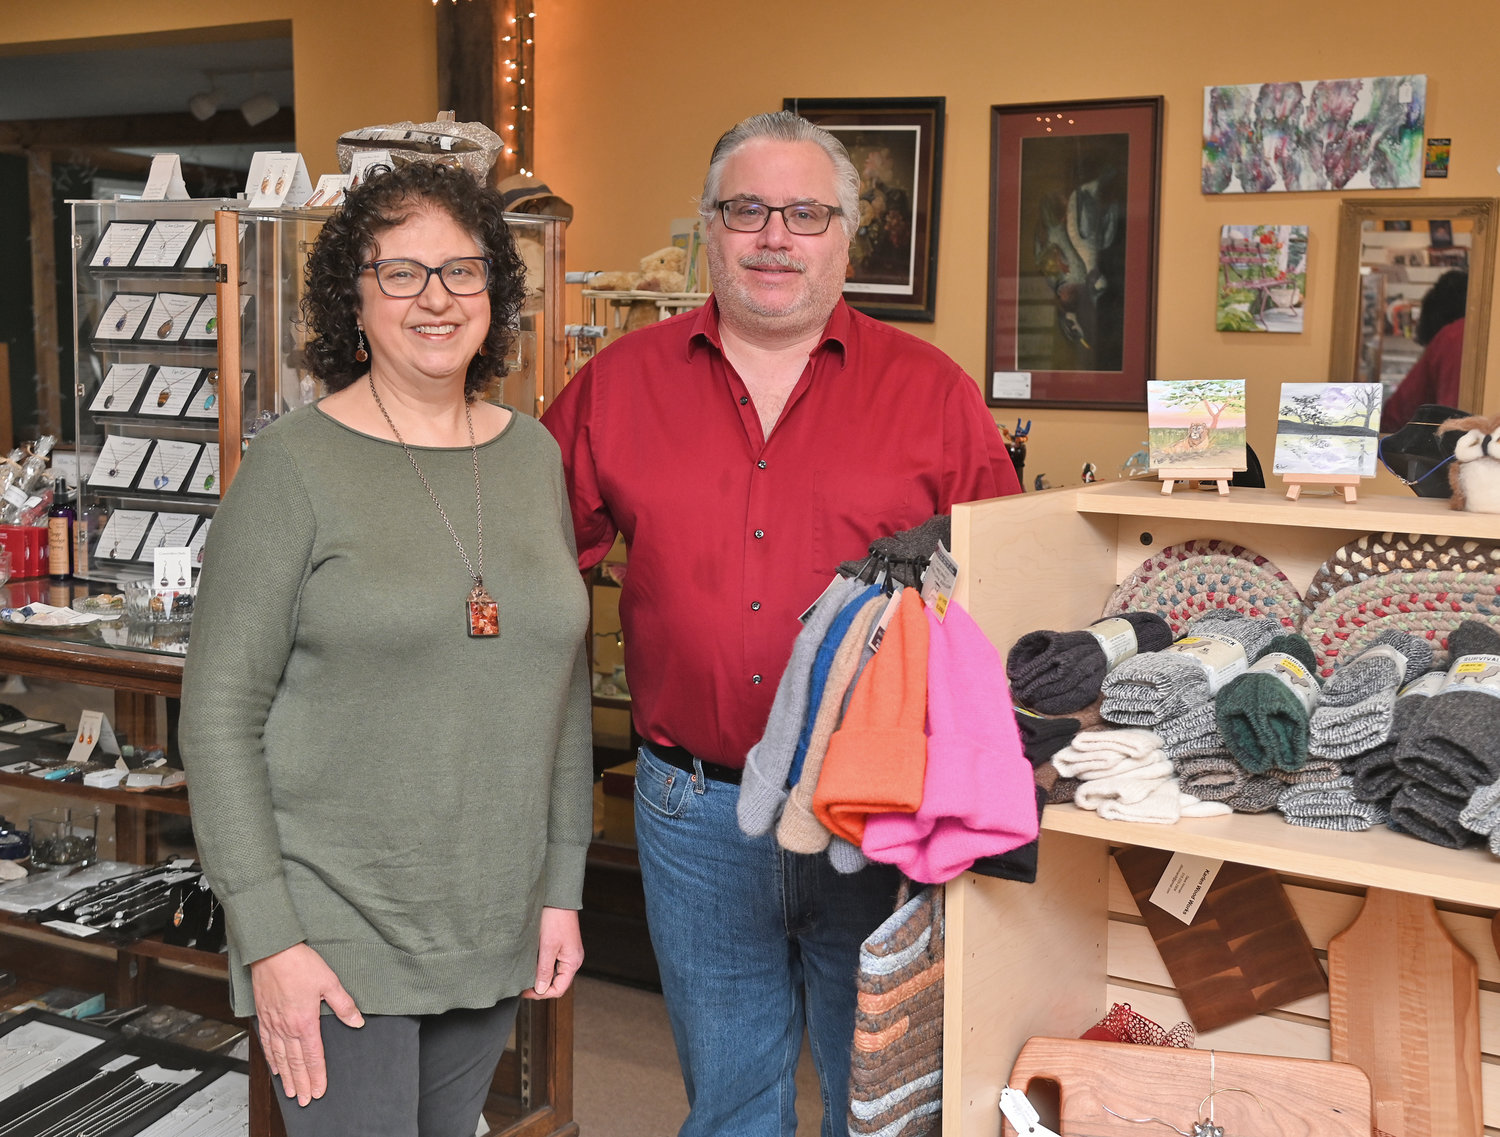 Maria and Alan Ringlund in the Photo Shoppe Fusion Art & Gift Gallery on Turin Road, where they stand among the goods made by local artists available for sale at their shop. The couple has officially announced their retirement.